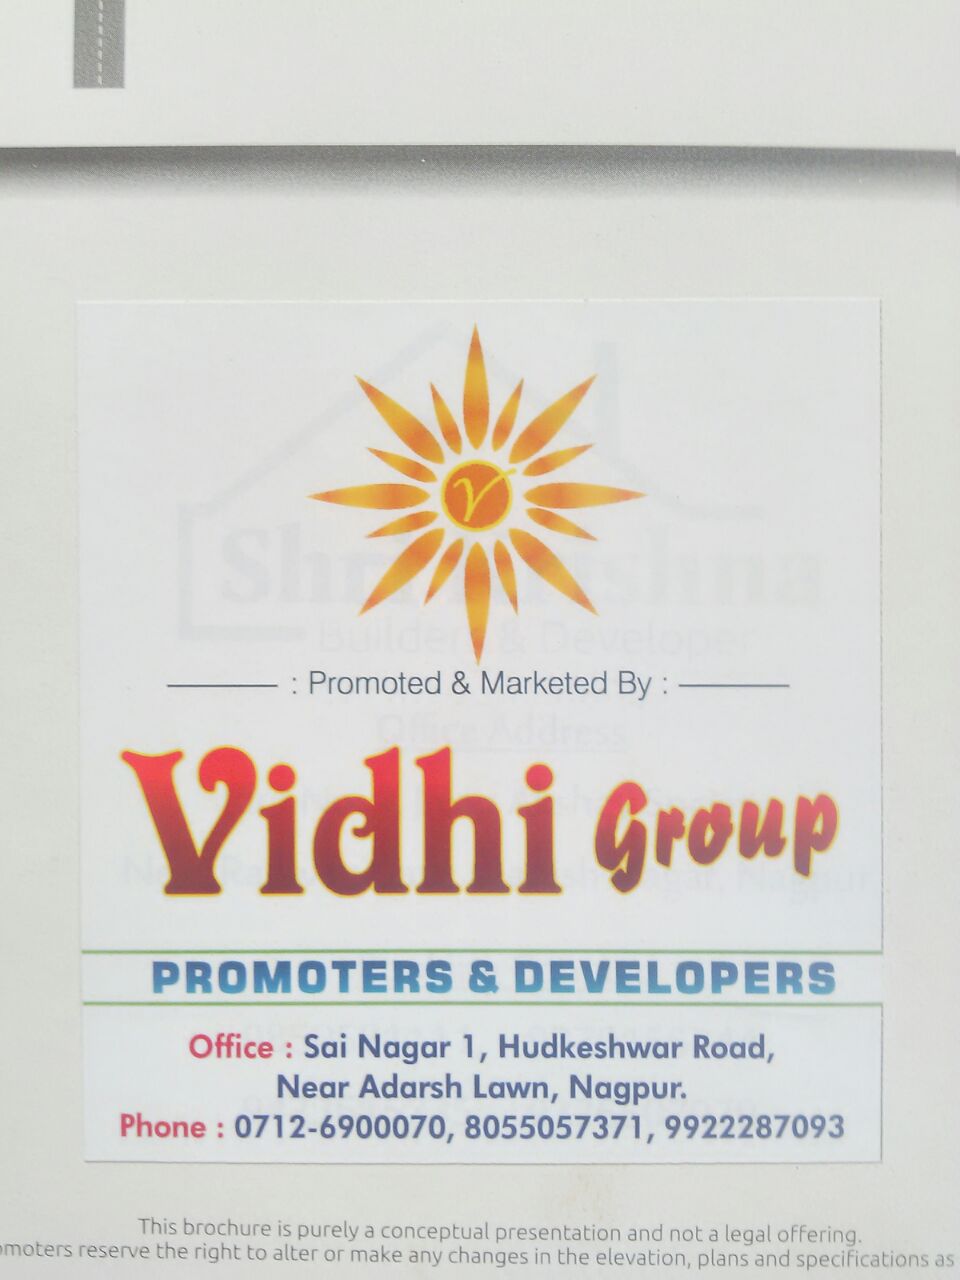 vidhi group promoters and developers